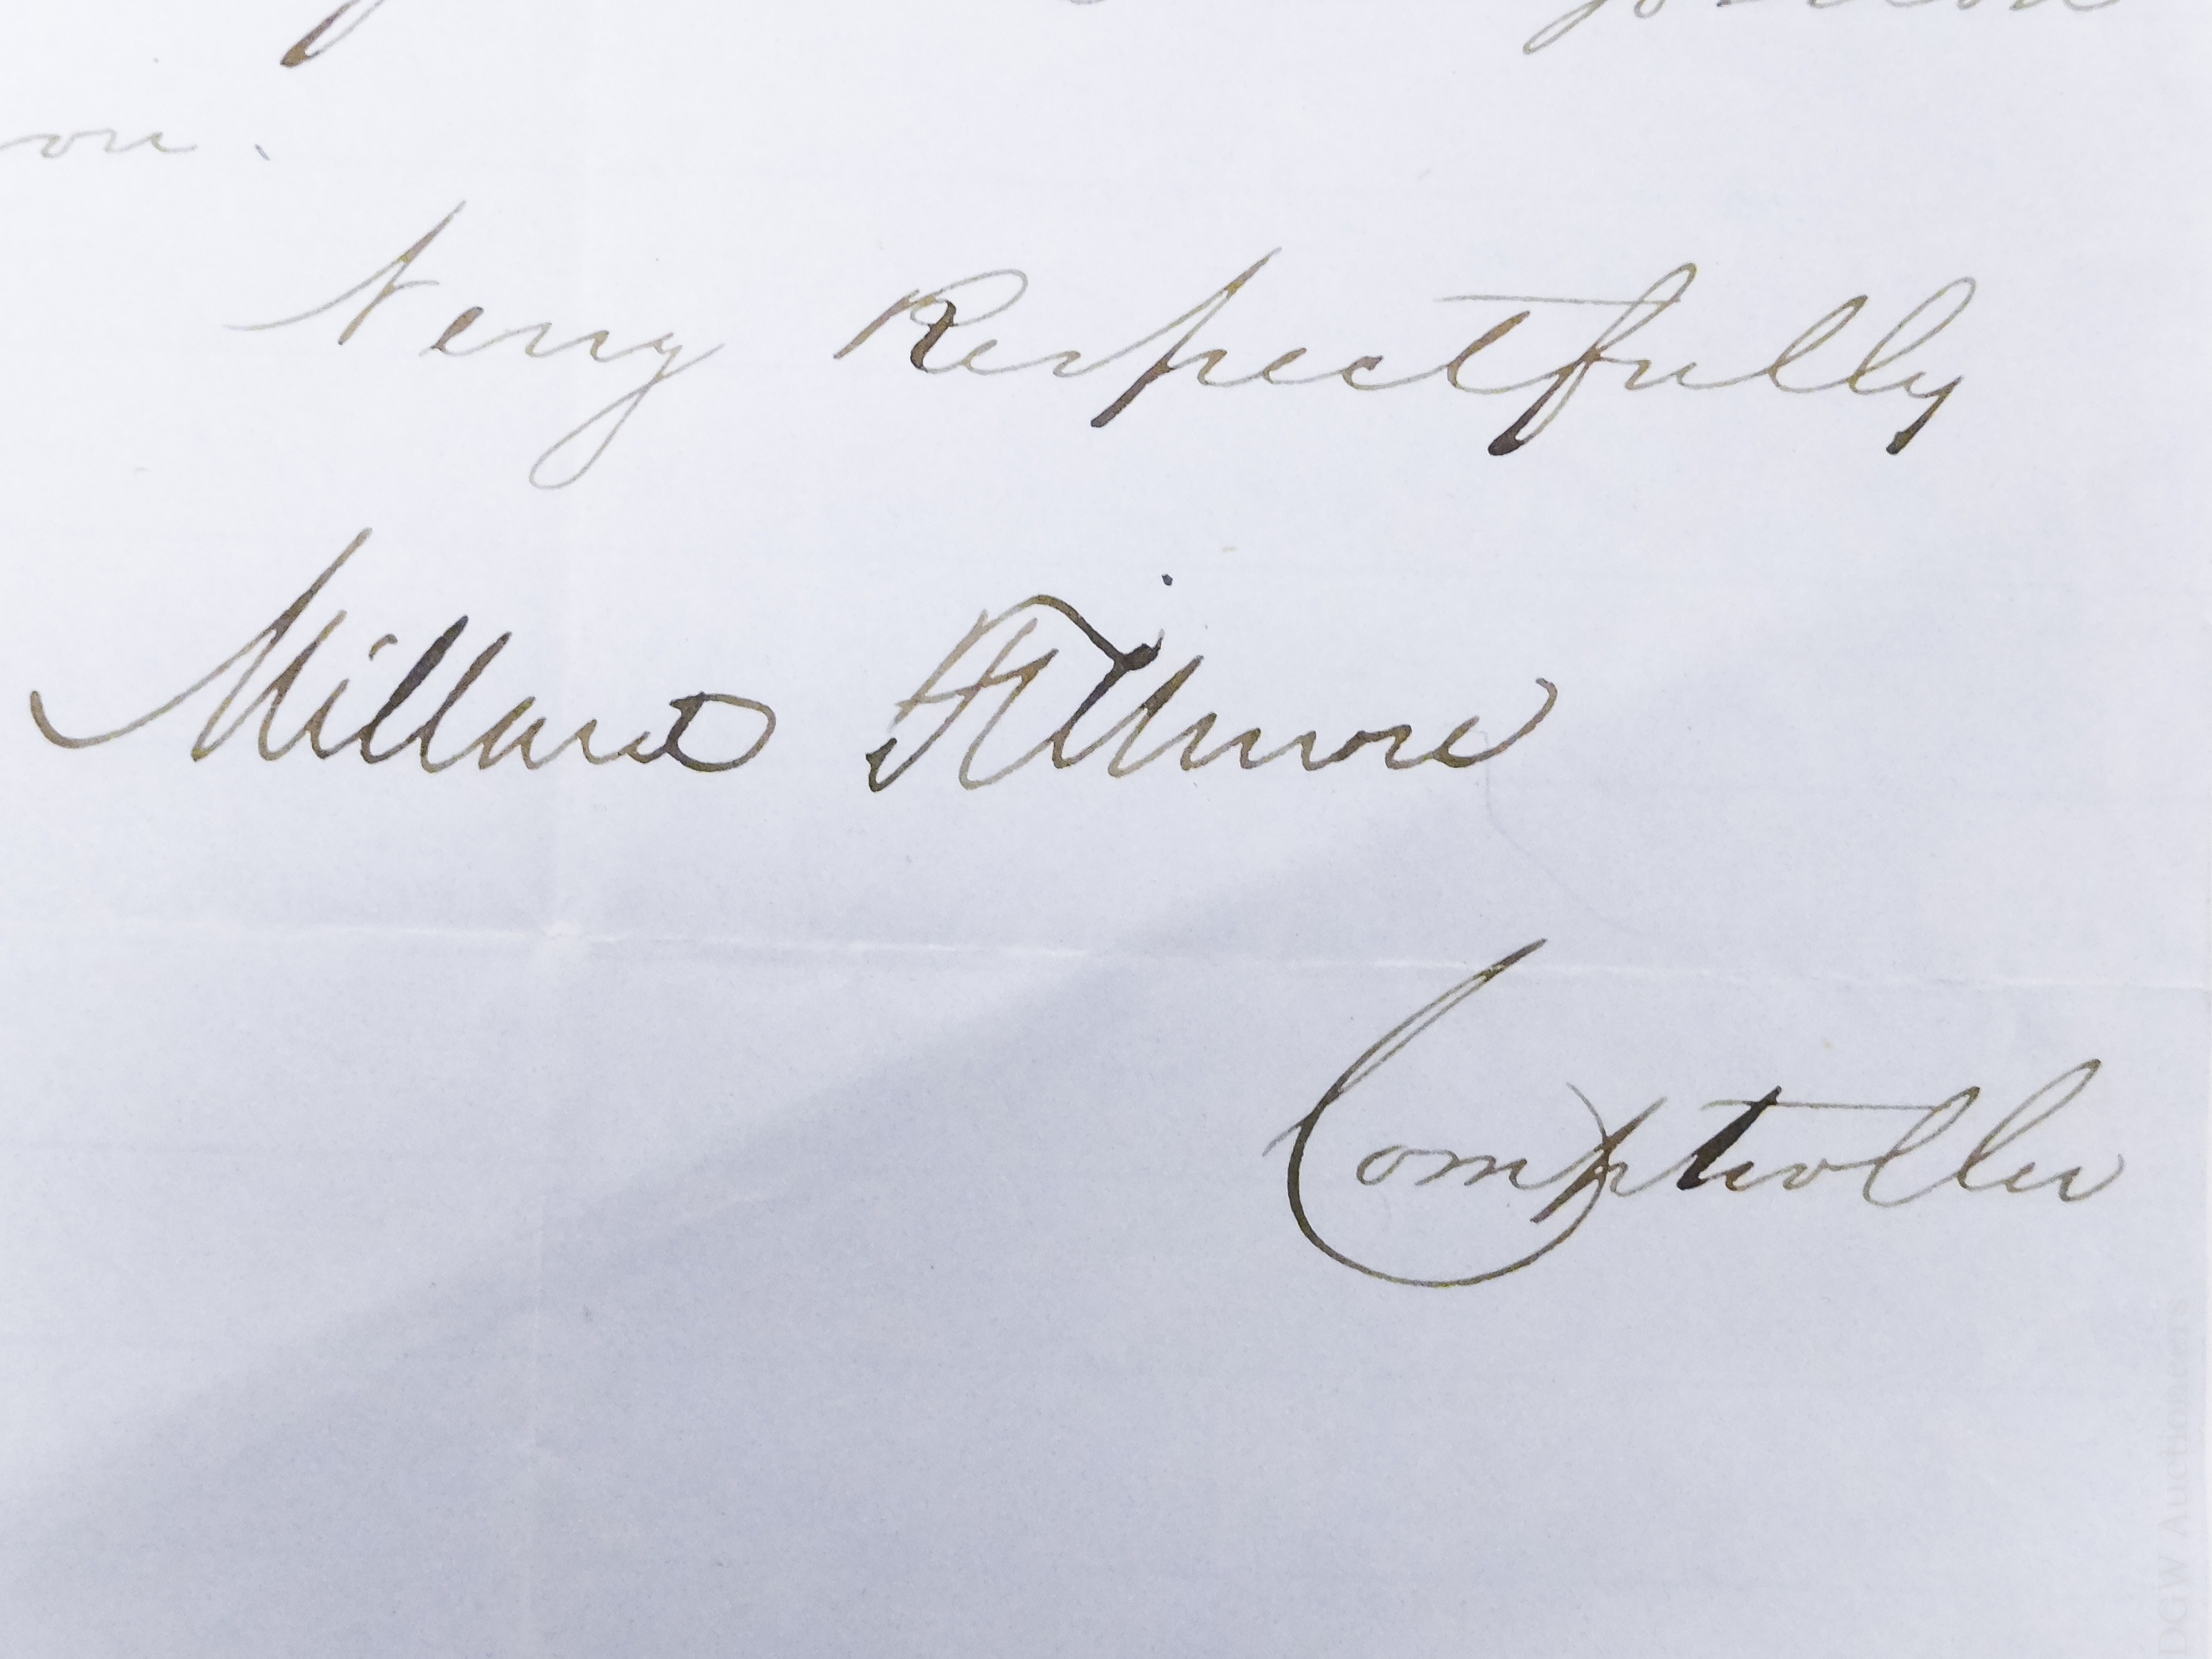 Letter from Millard Fillmore, 1848. - Image 2 of 6